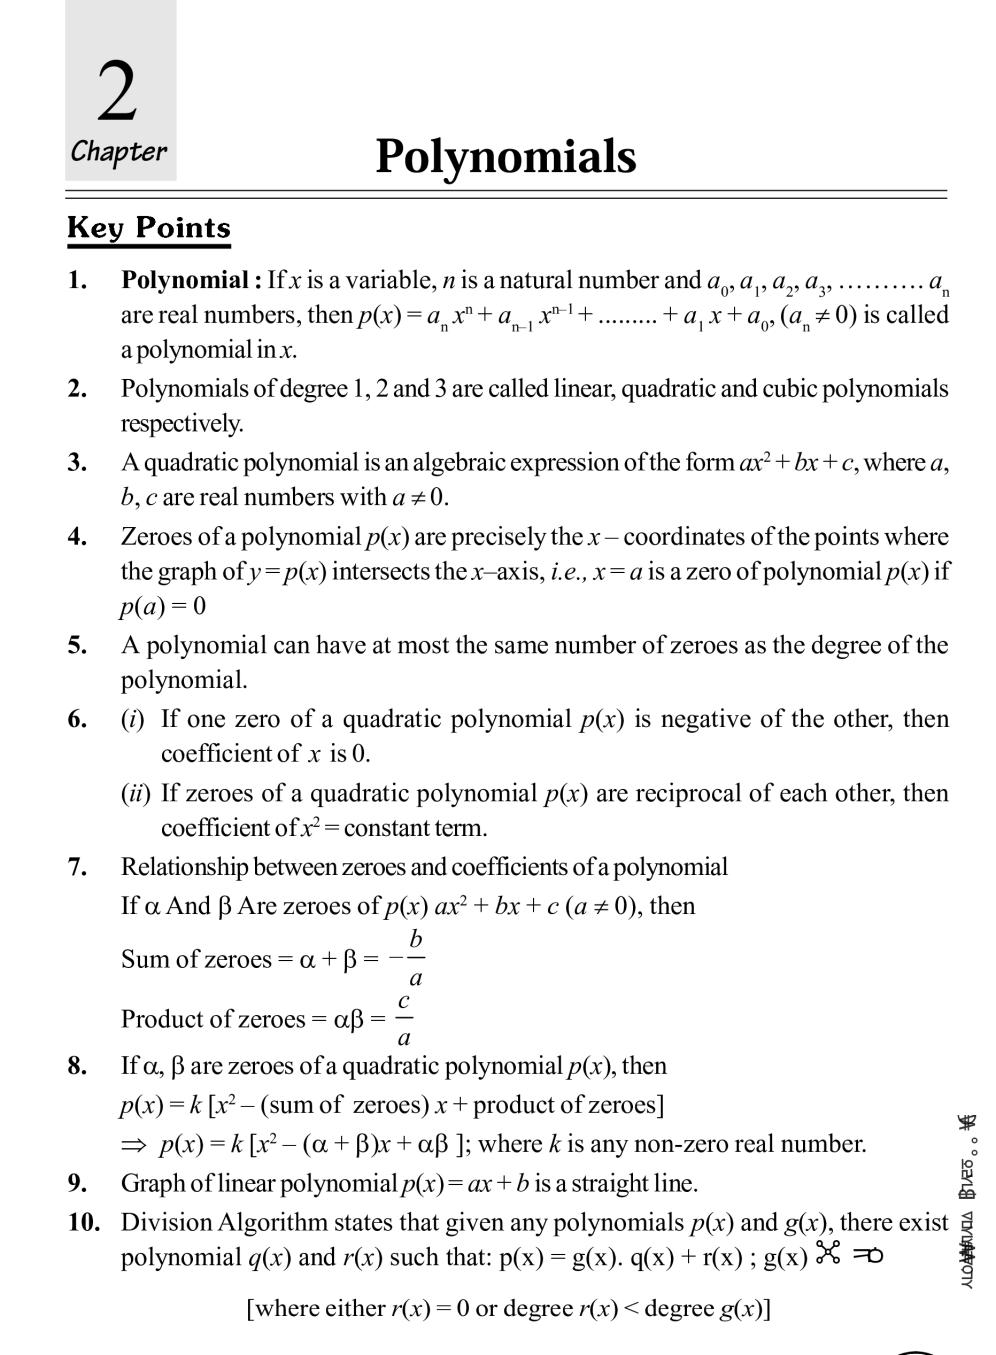 intro-to-polynomials-notes-and-worksheets-lindsay-bowden